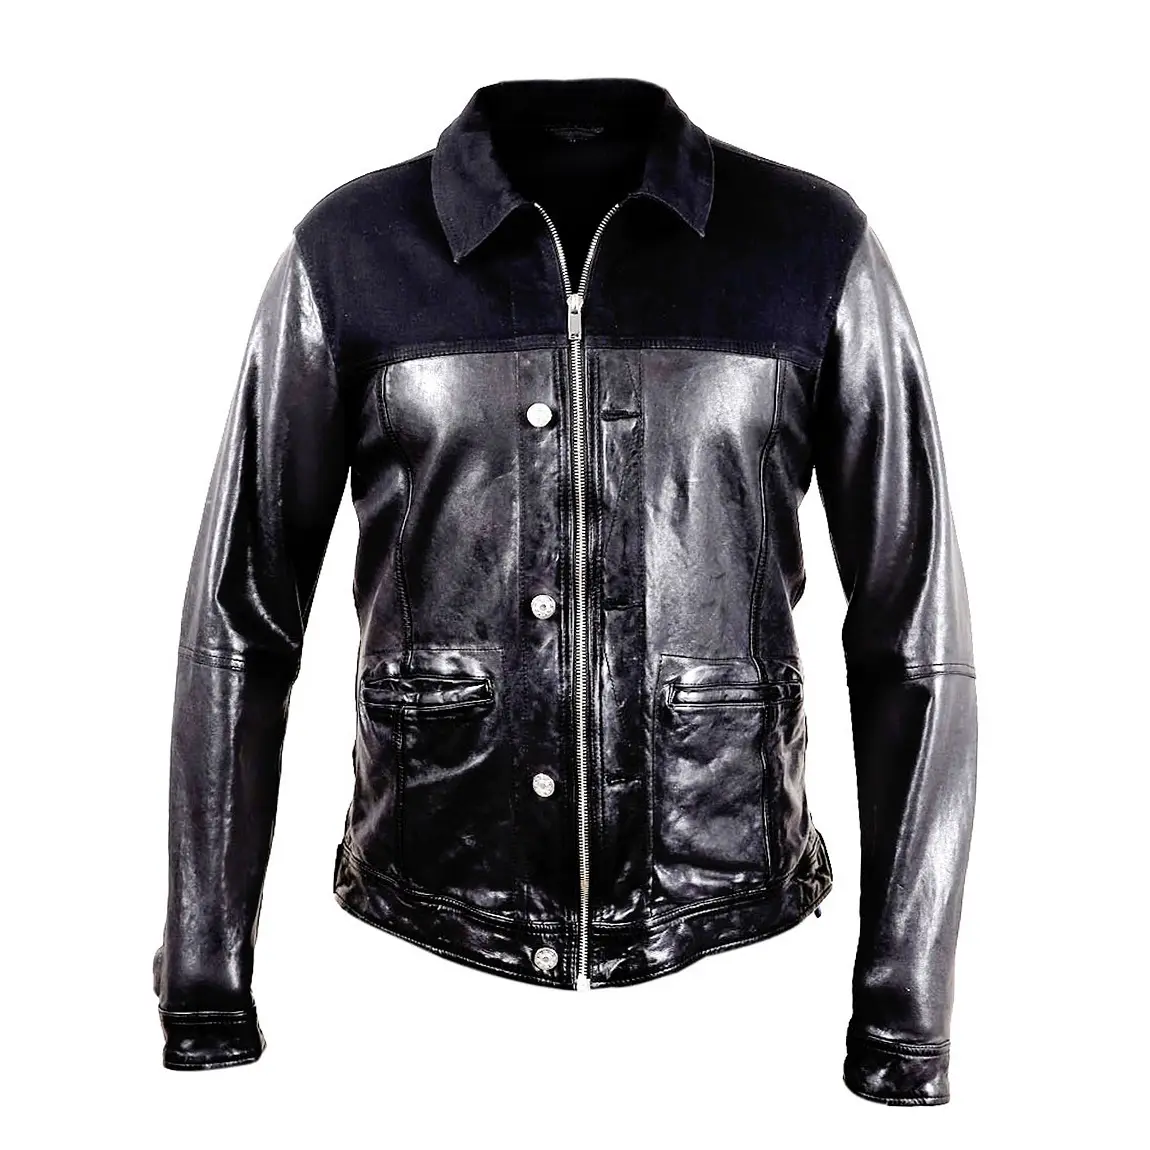 Shinning Jet Black Color Washed Leather Jacket With Denim Fabric Motor Bike Zipper Man comfortable Leather Jacket and Coats Mens